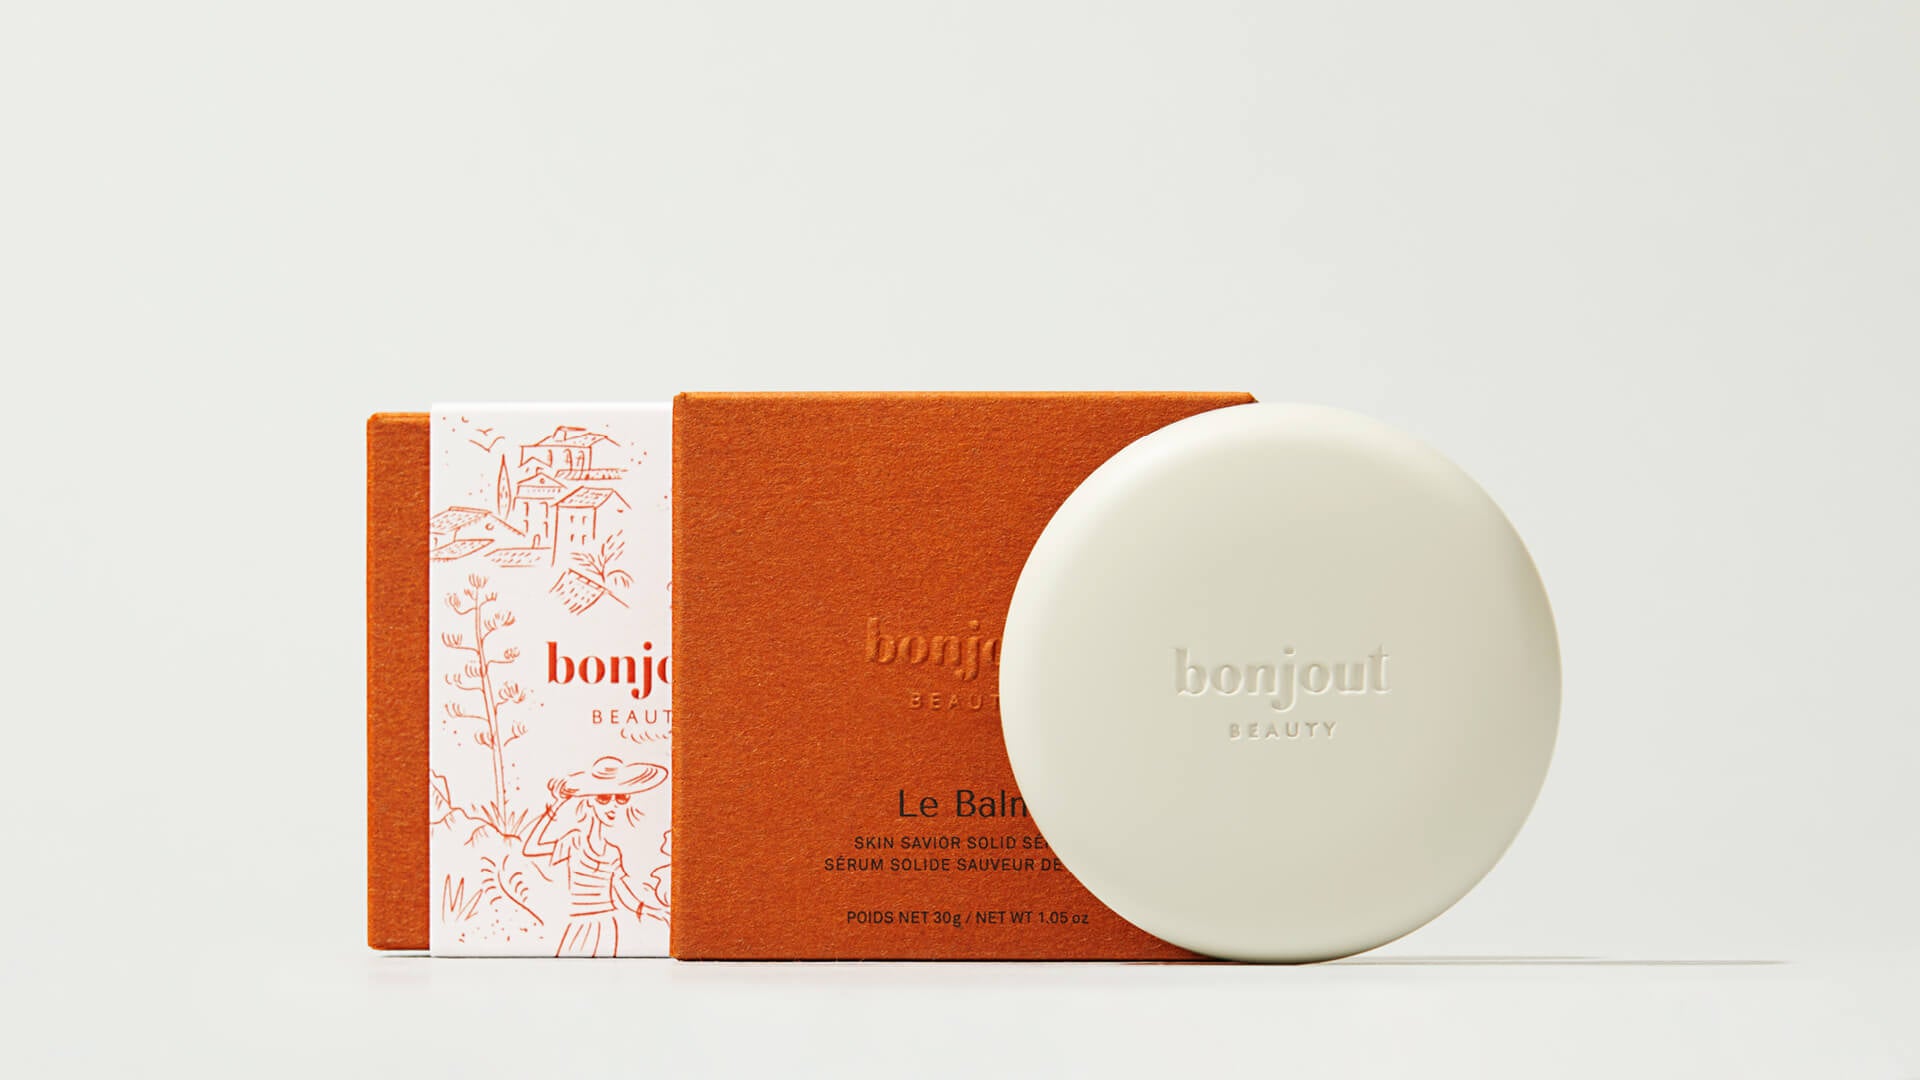 Bonjout Beauty's Le Balm product and packaging